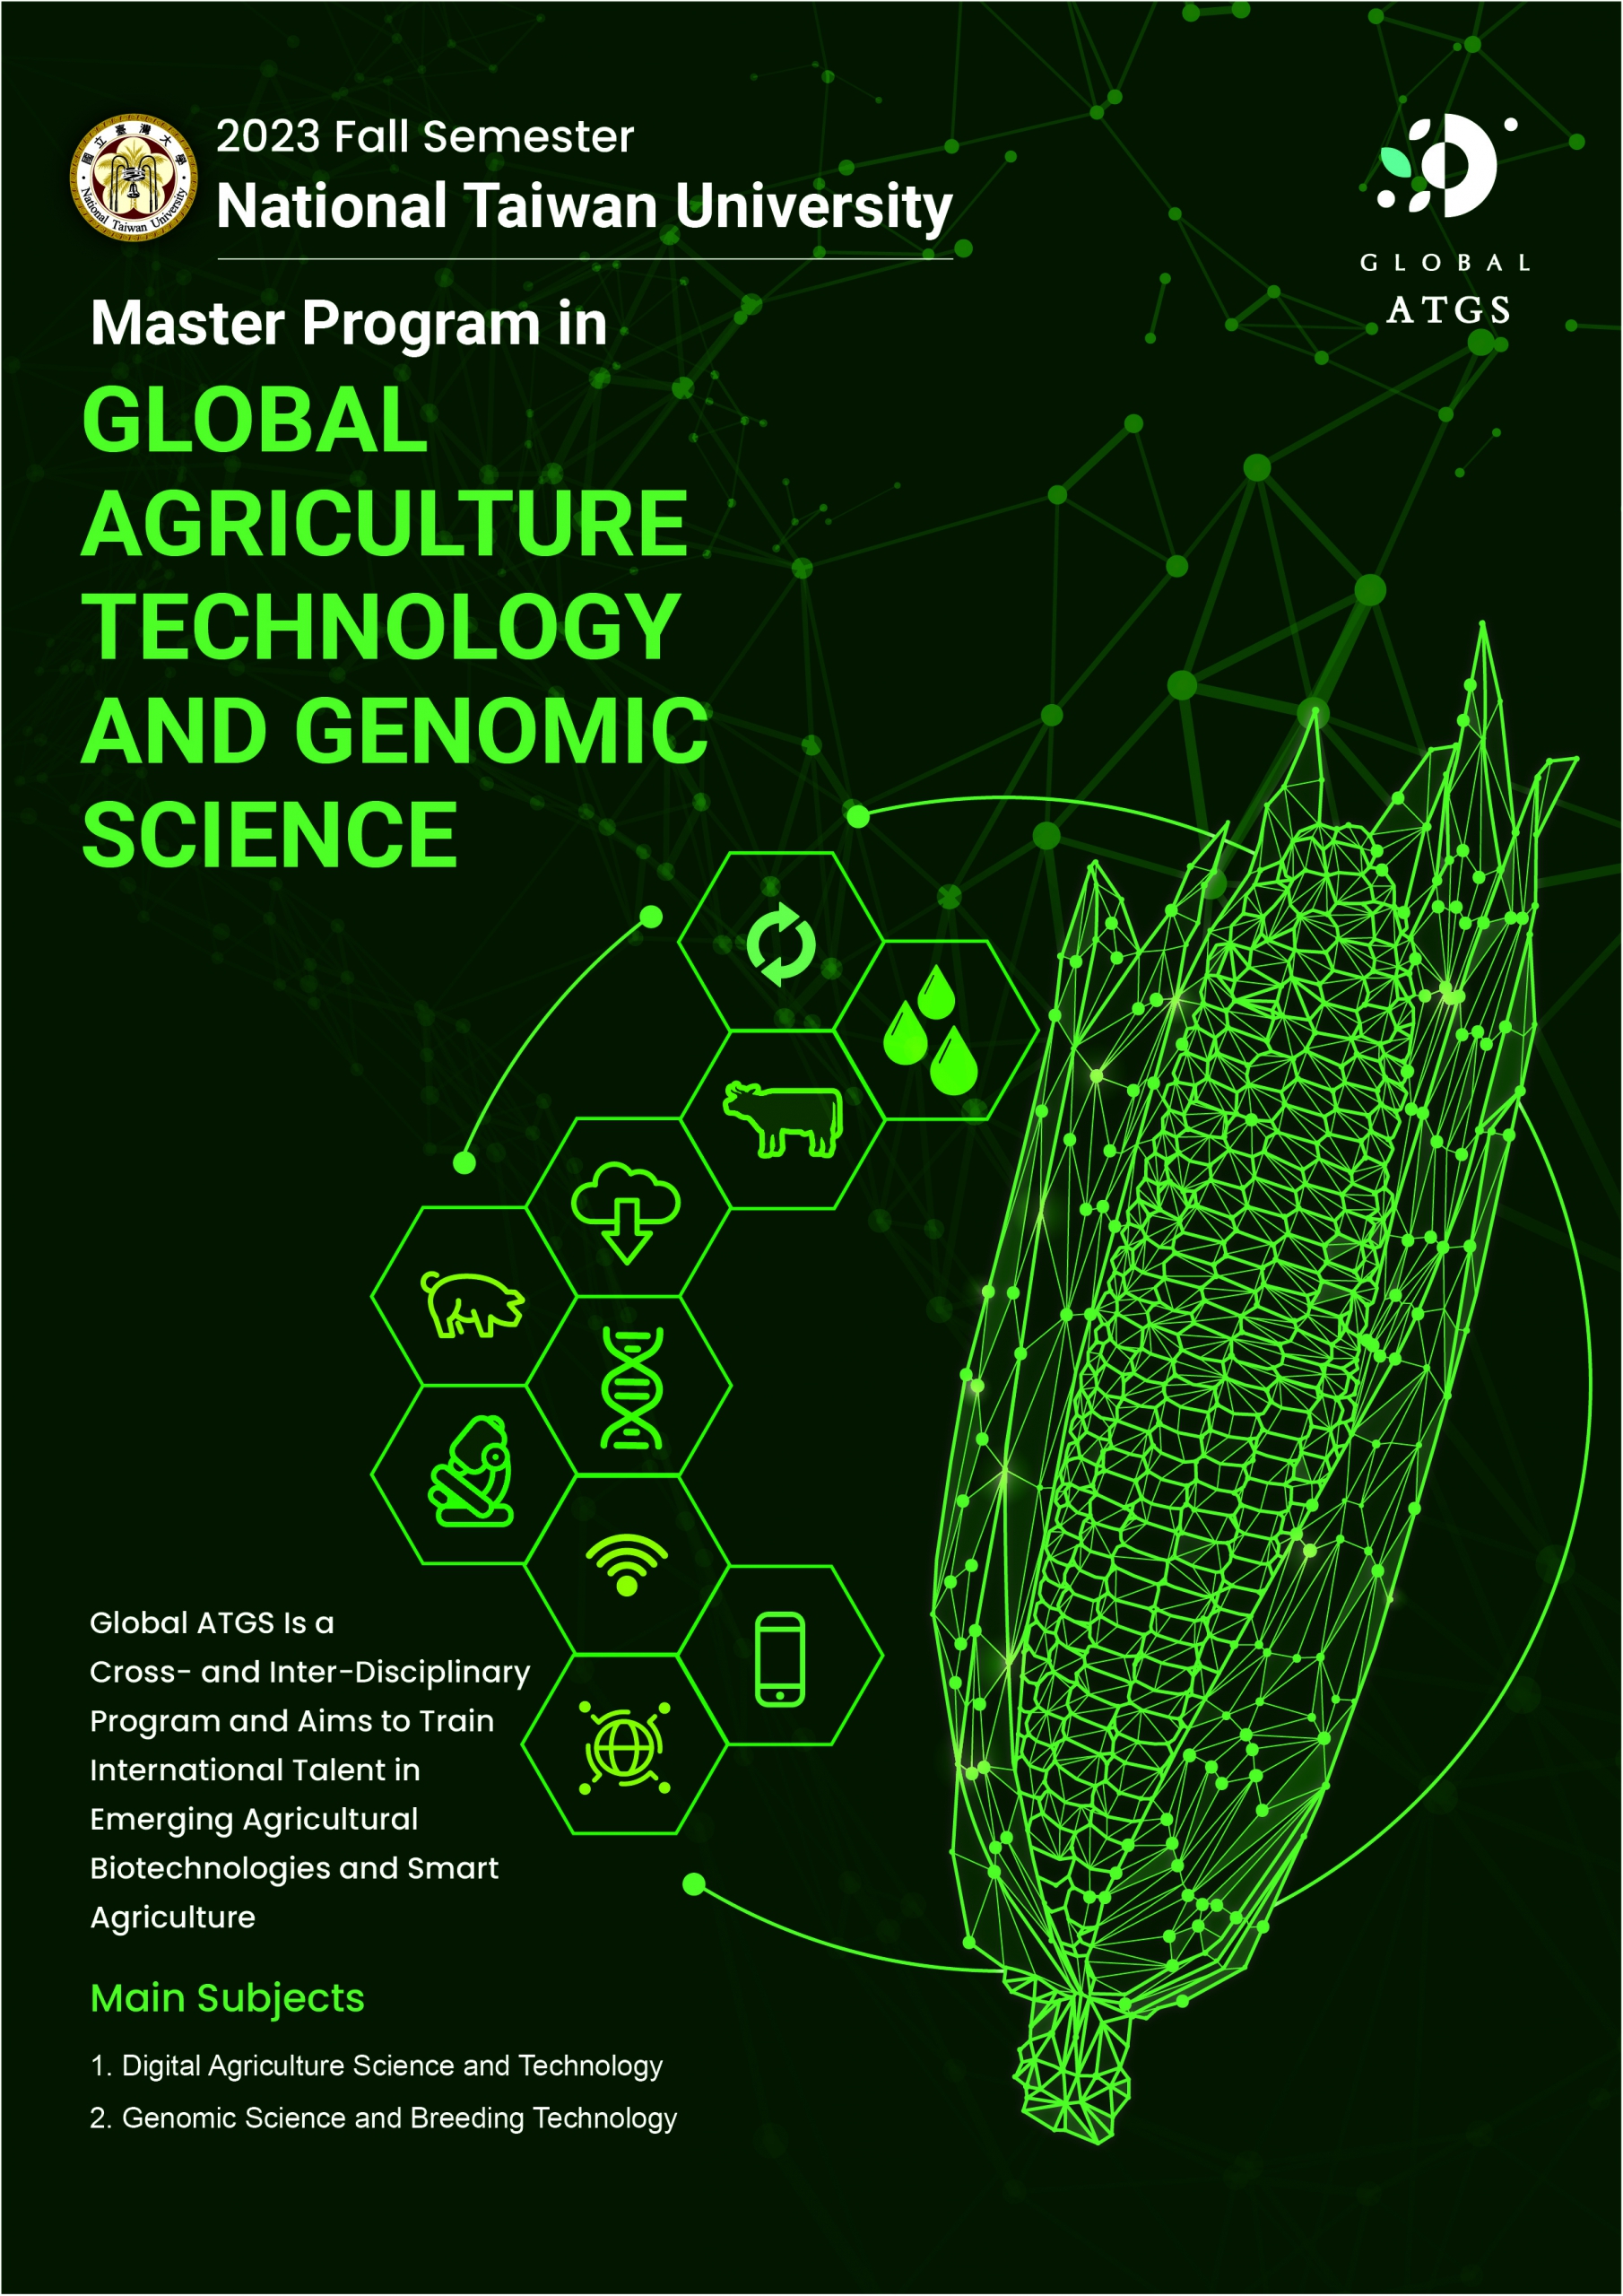 【2022.10.28】>Information Session < Master Program in Global Agriculture Technology and Genomic Science, National Taiwan University